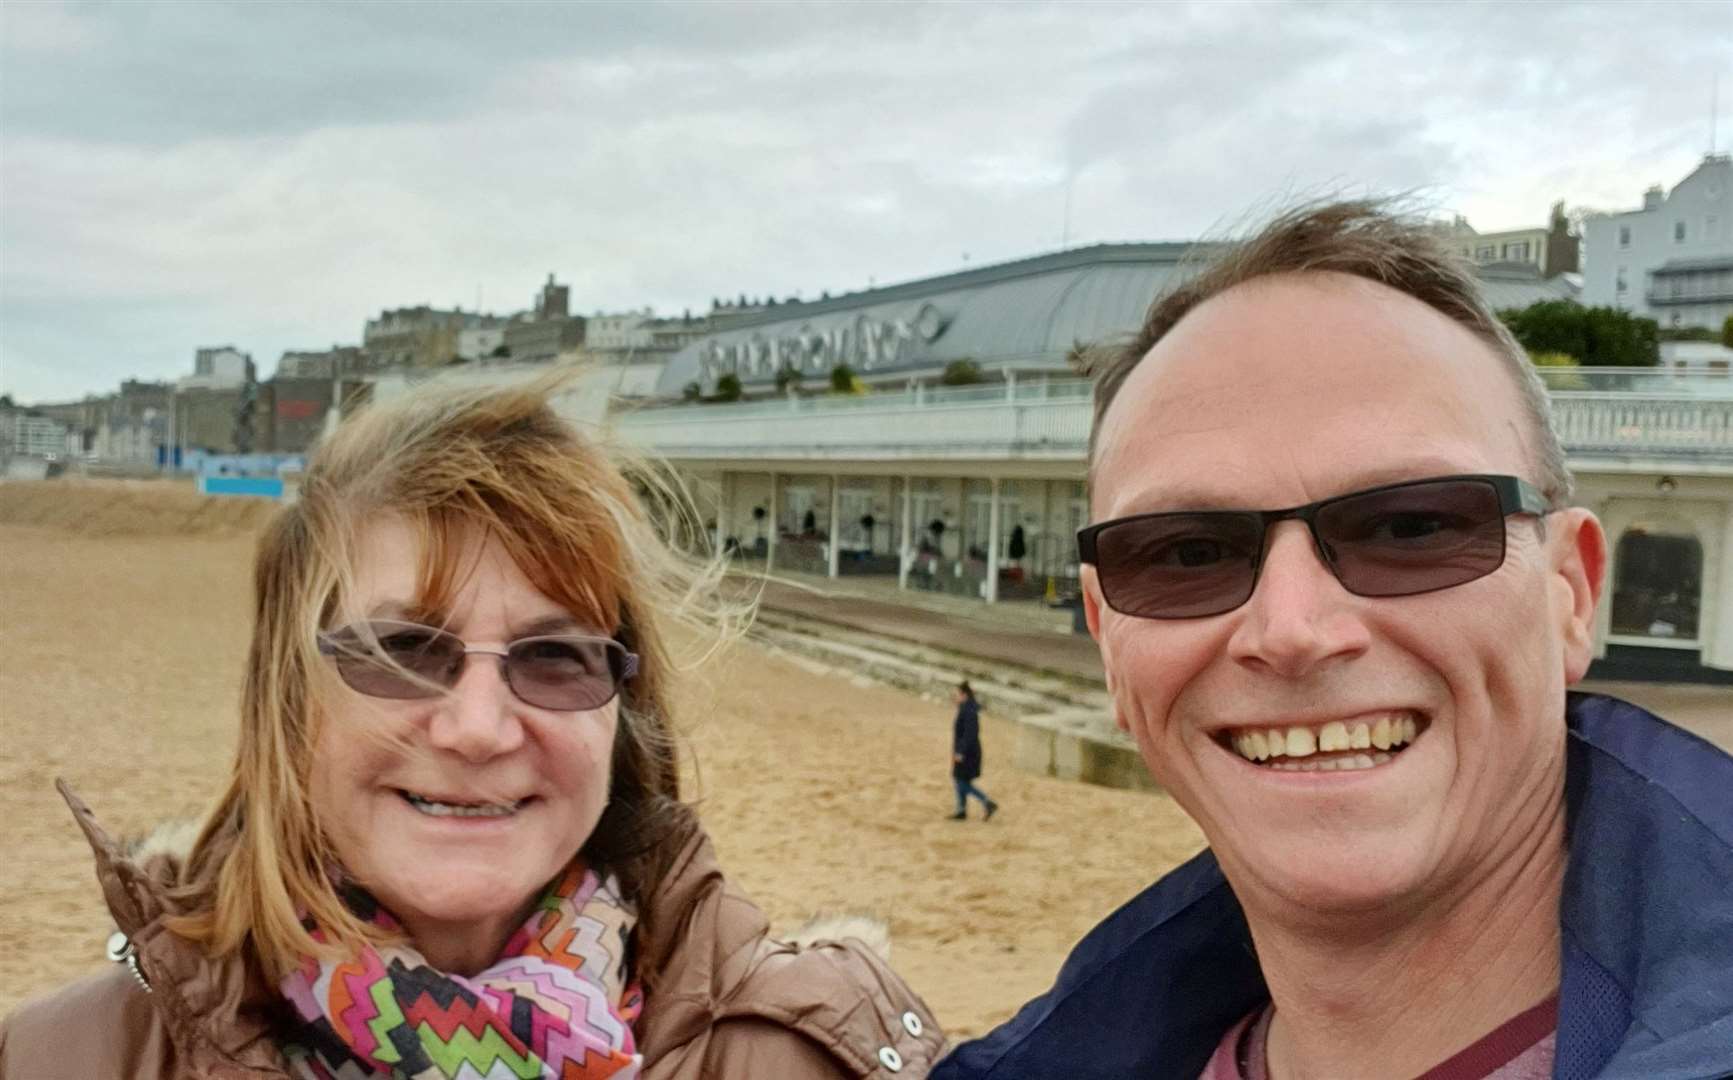 David Bingham and partner Una Cooper outside the Royal Victoria Pavilion in Ramsgate. Picture: SWNS